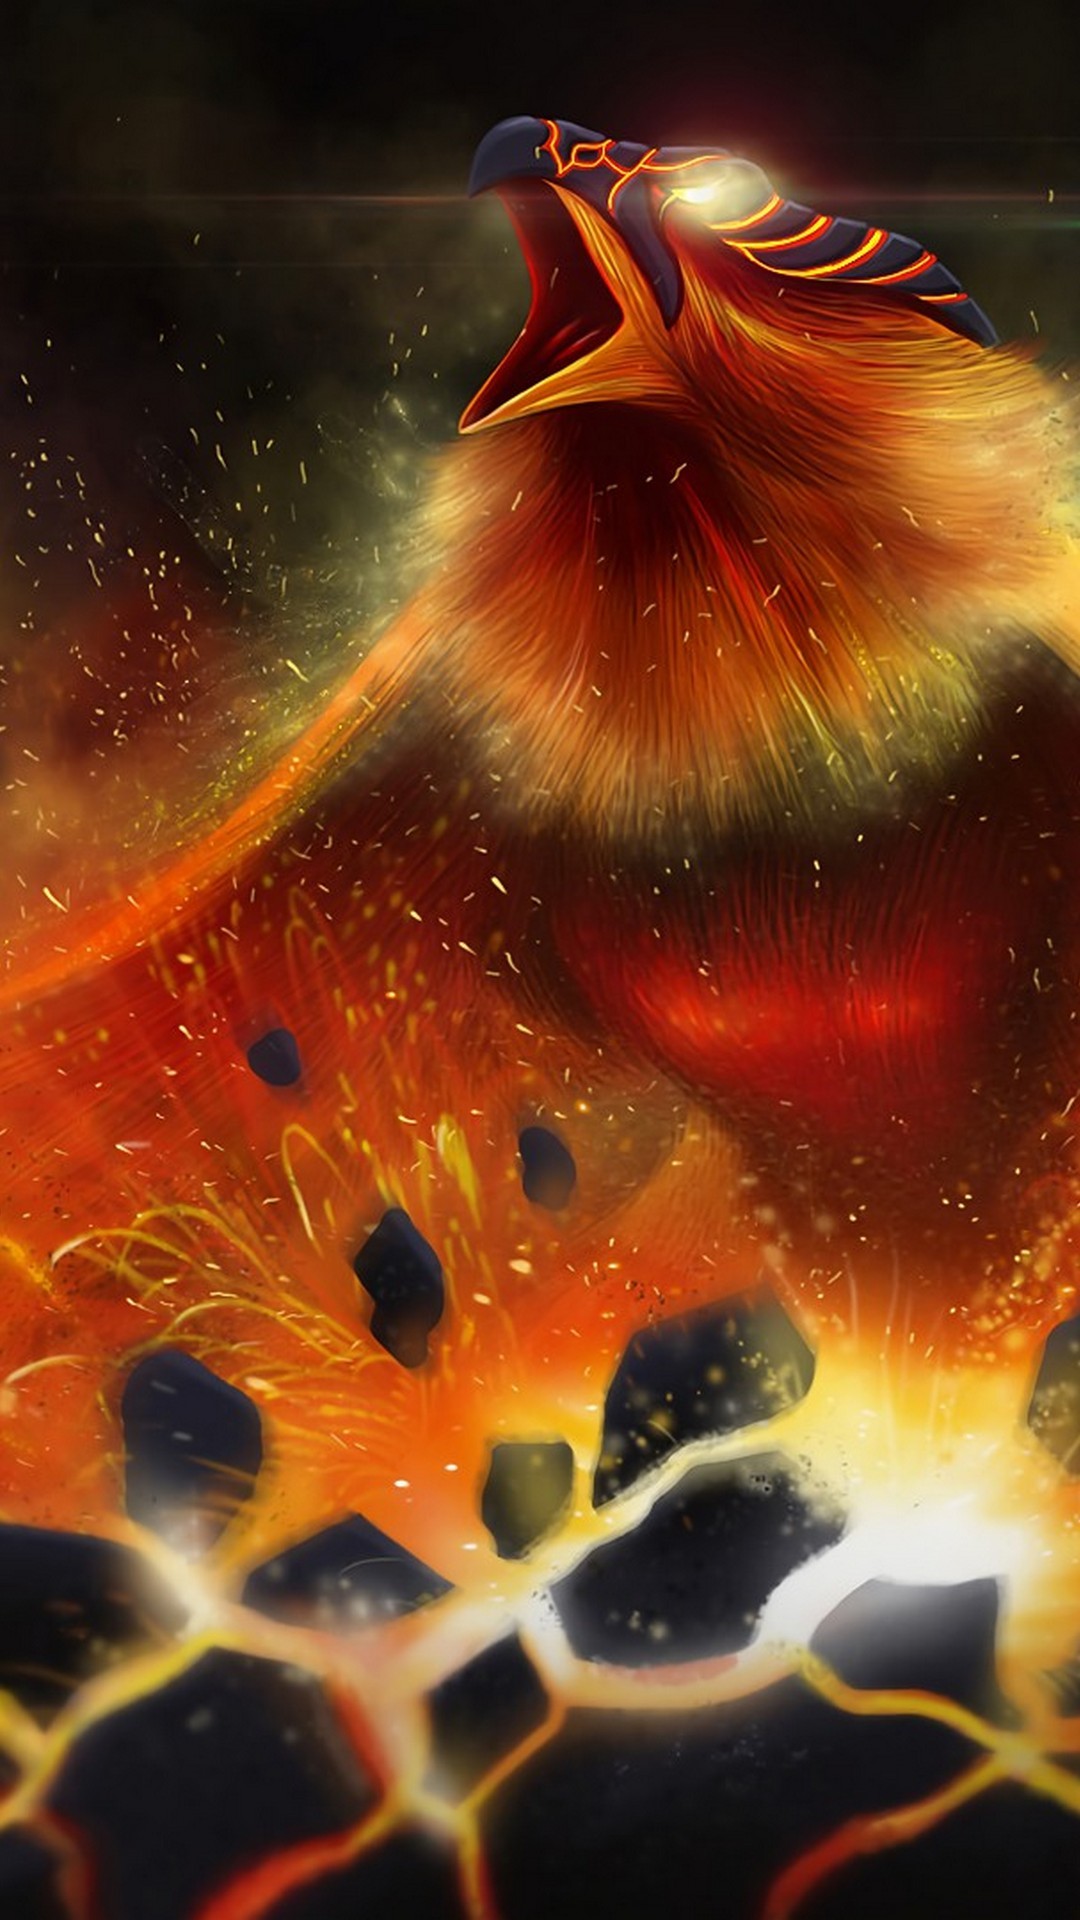 Dark Phoenix Wallpaper For iPhone with image resolution 1080x1920 pixel. You can make this wallpaper for your iPhone 5, 6, 7, 8, X backgrounds, Mobile Screensaver, or iPad Lock Screen